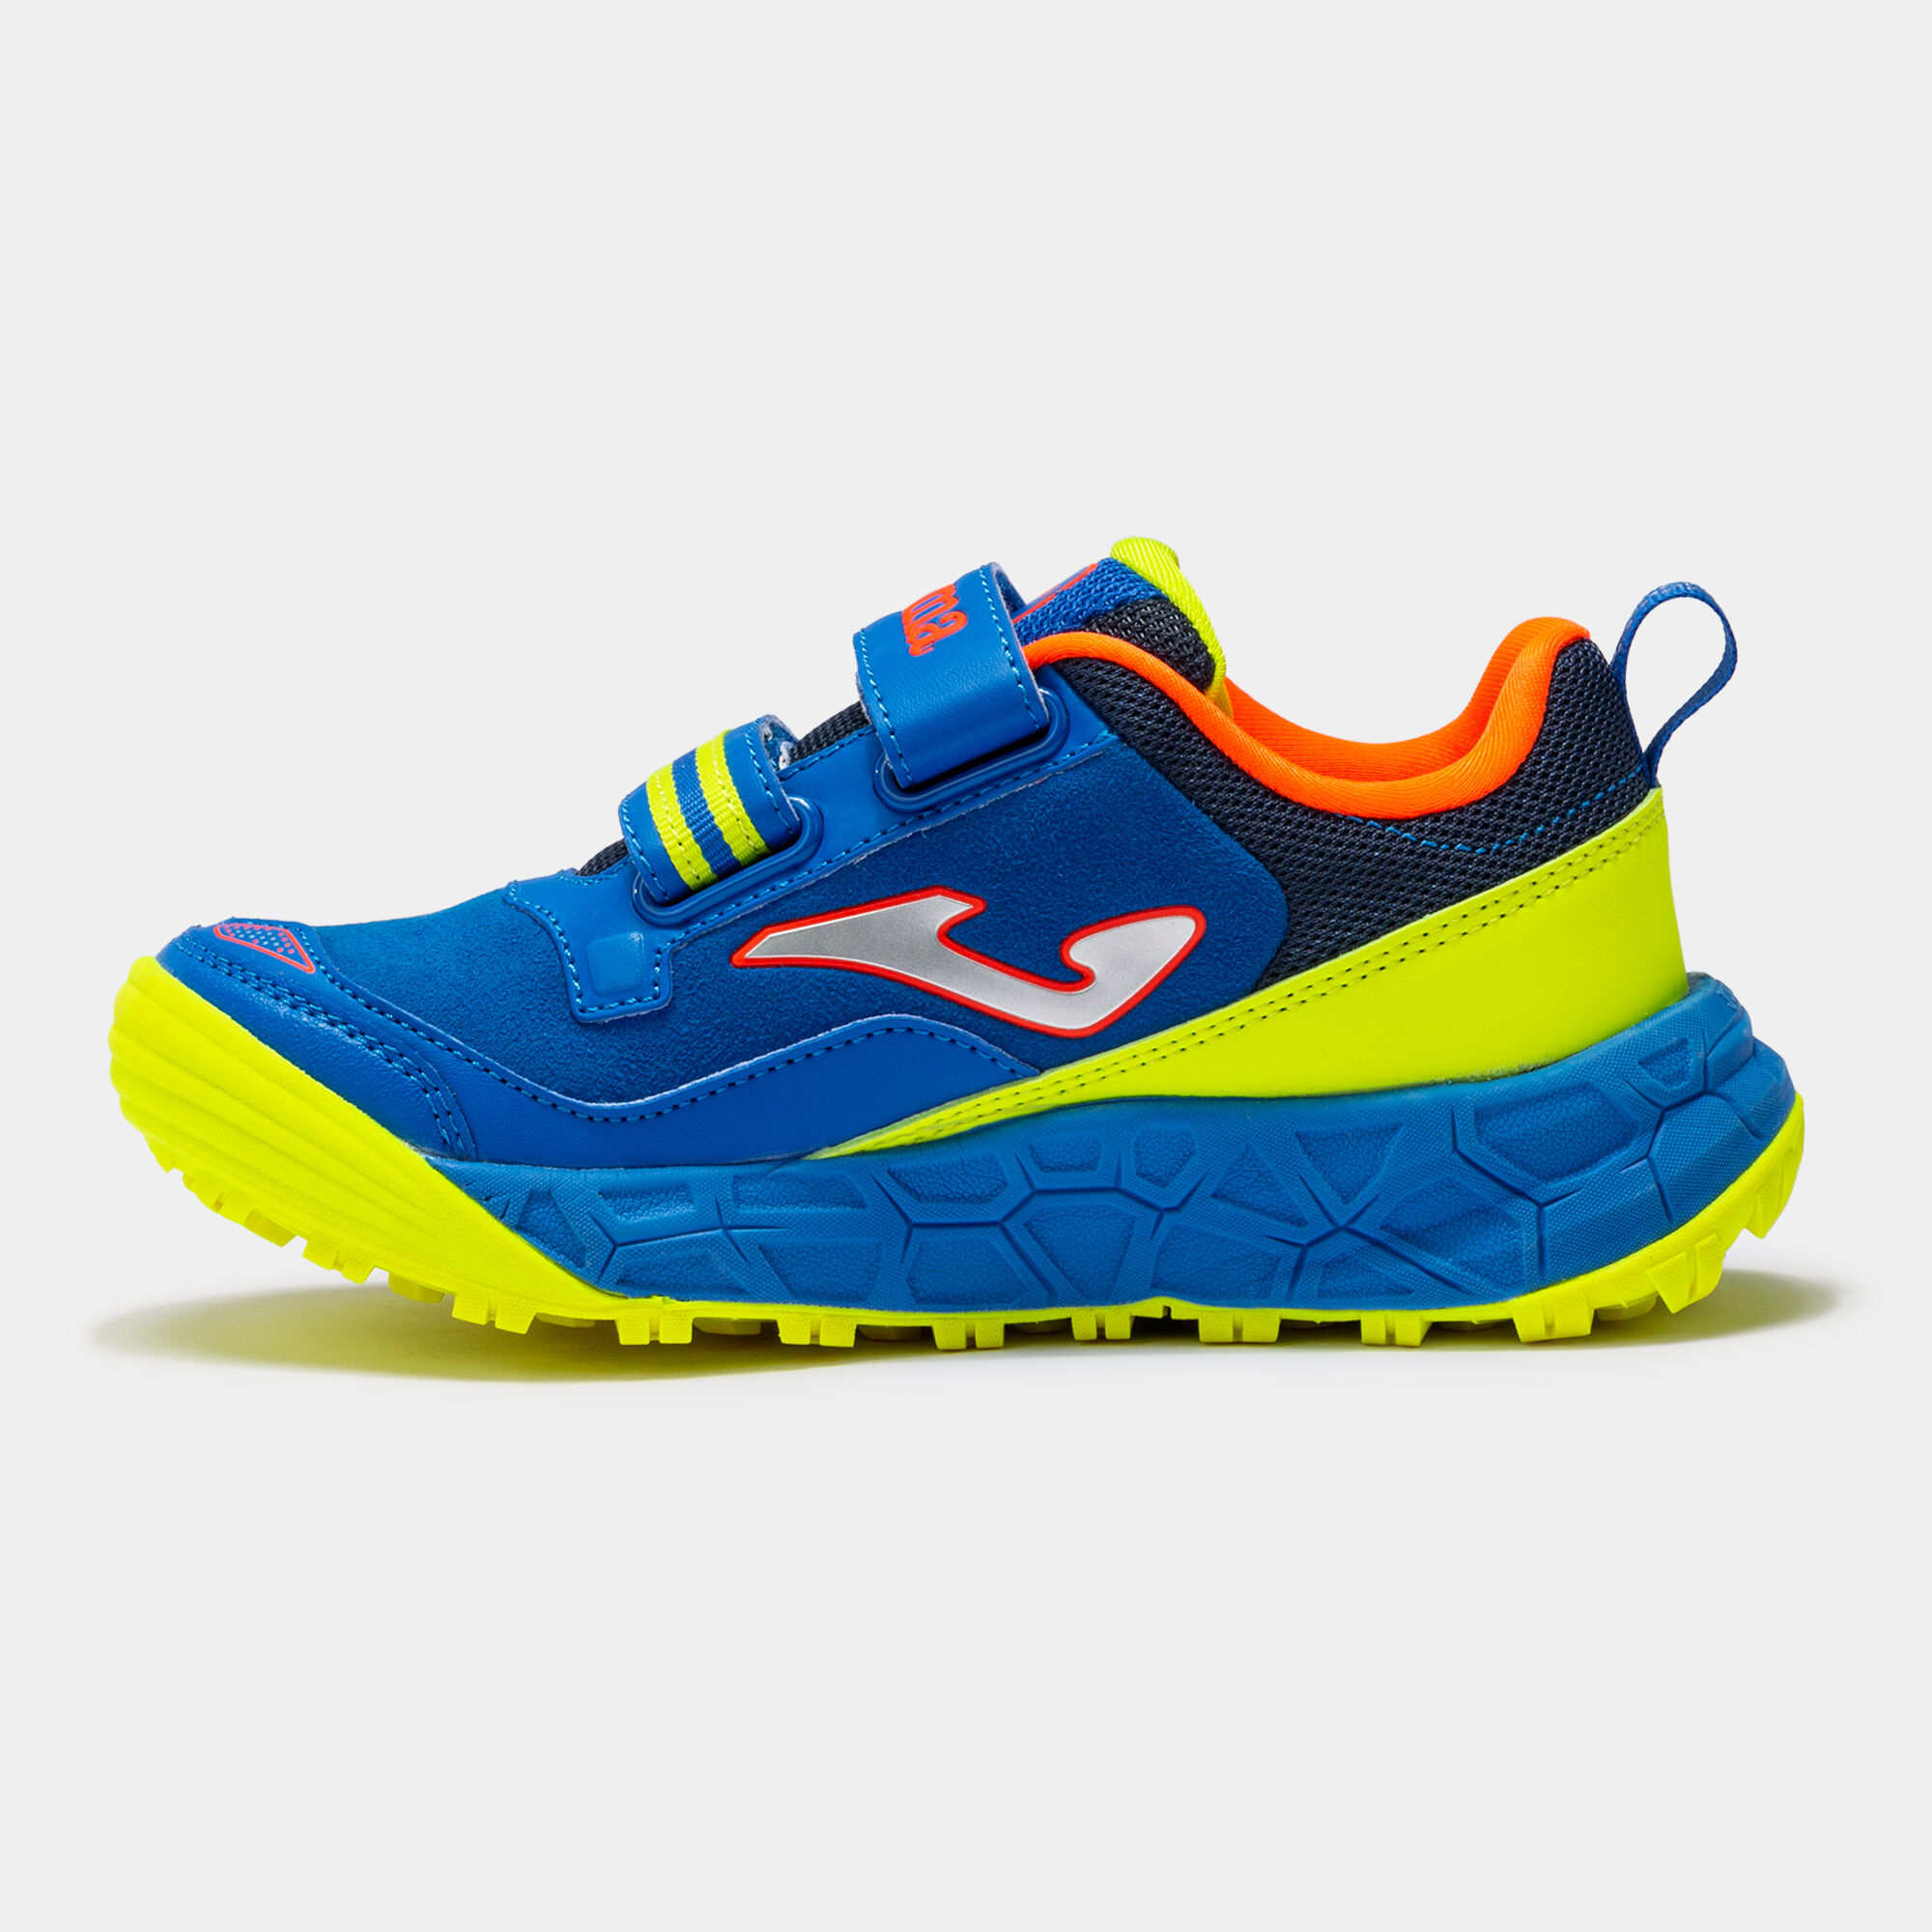 TRAIL-RUNNING SHOES ADVENTURE 22 JUNIOR ROYAL BLUE FLUORESCENT YELLOW